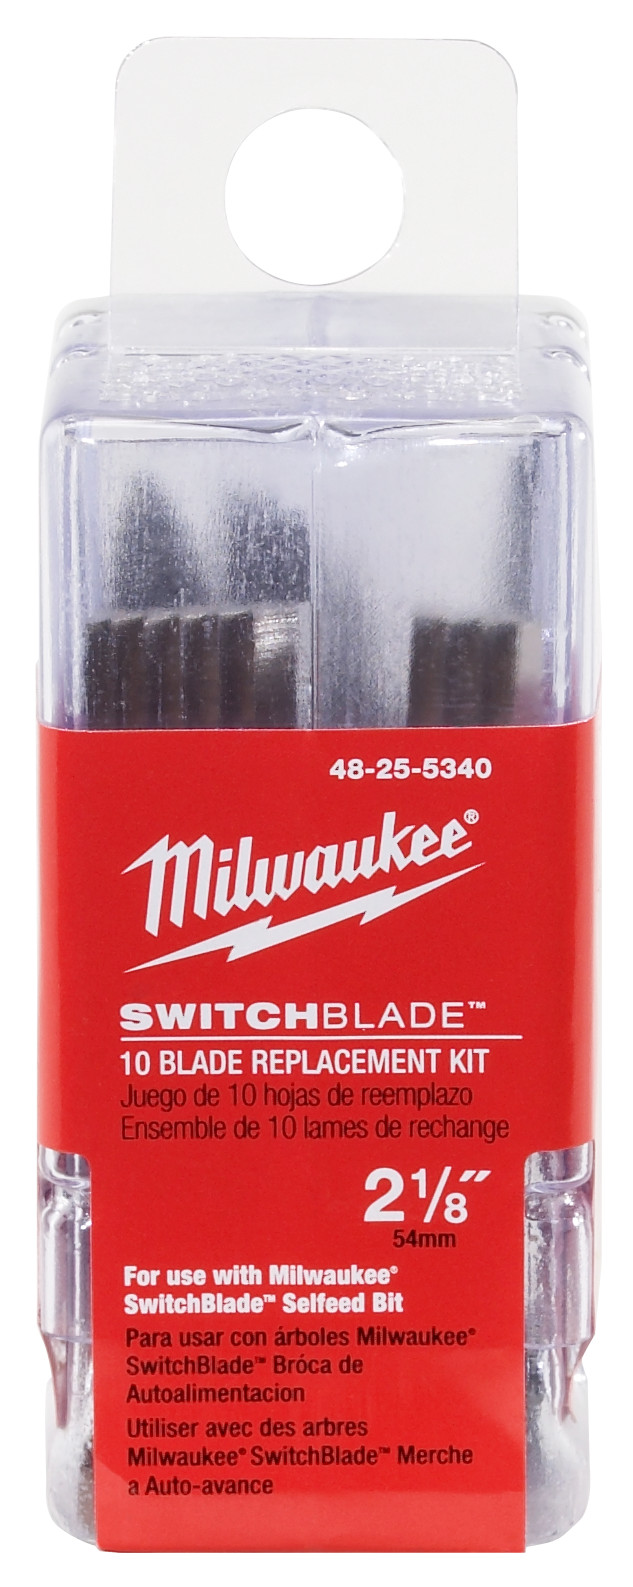 2-1/8 in. SWITCHBLADE 10 Blade Replacement Kit